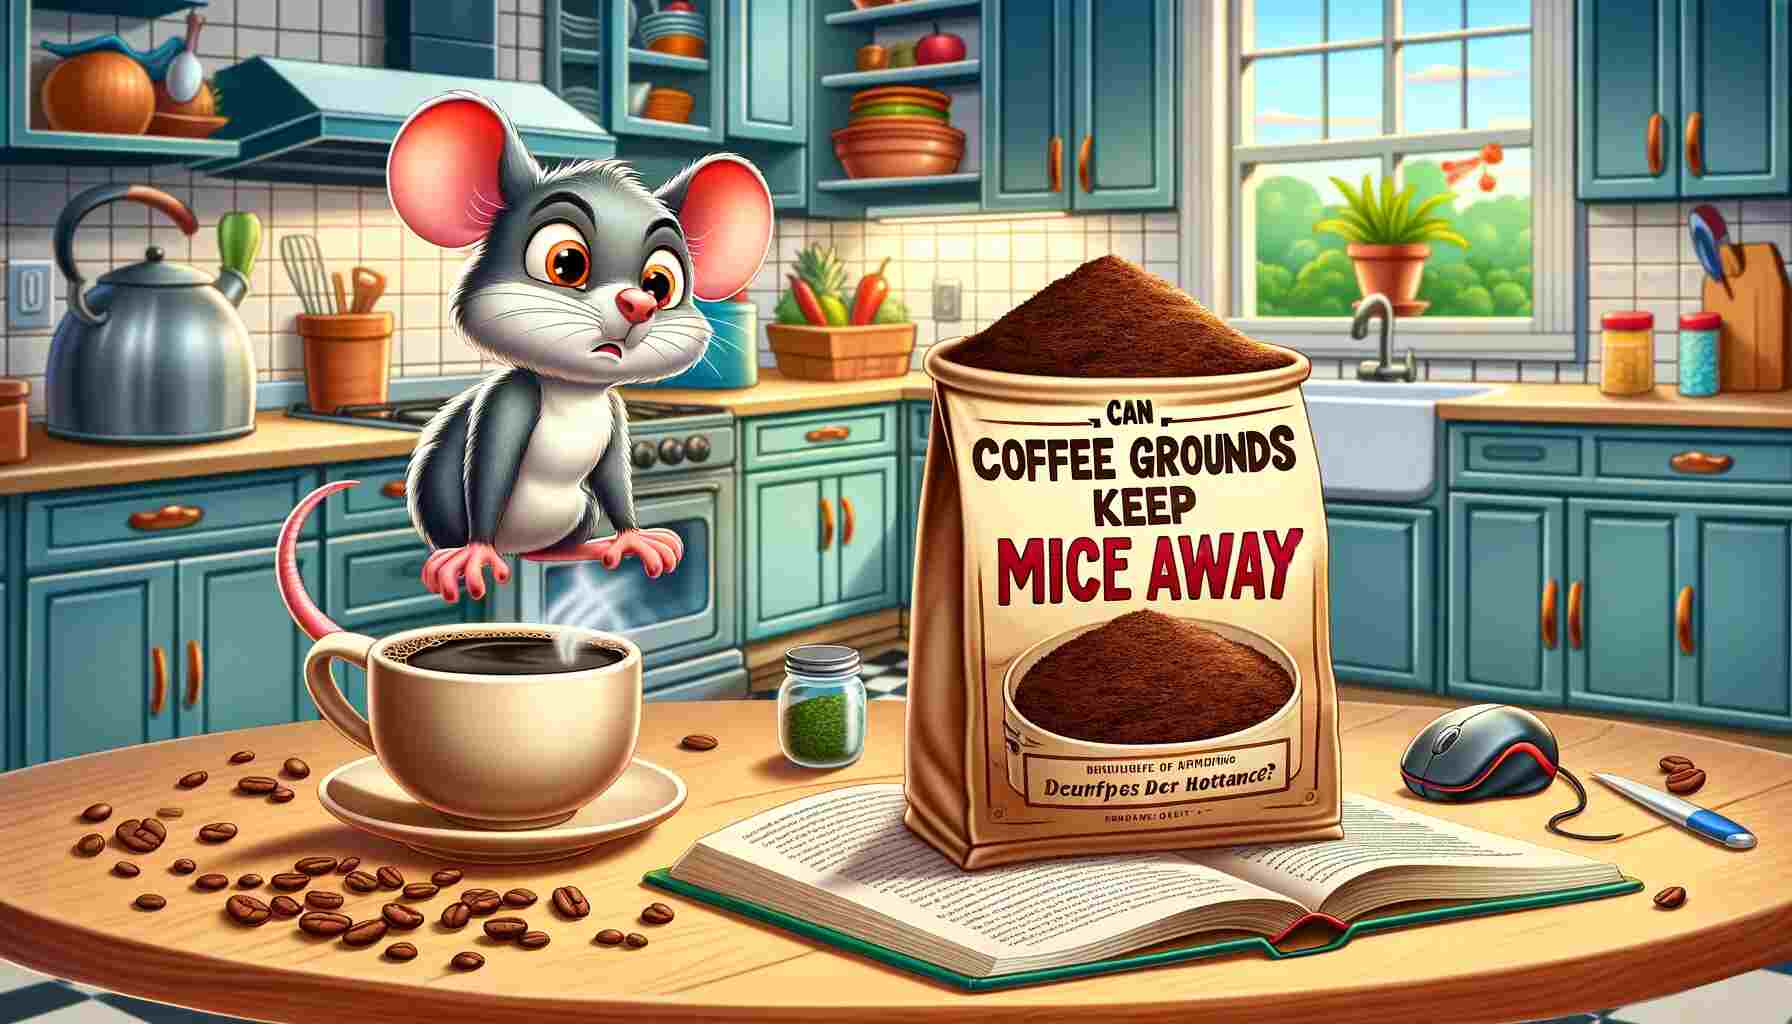 Here's the featured image for Can Coffee Grounds Keep Mice Away: Debunking the Myth. The illustration presents a kitchen scene with a mouse curiously looking at a bag of coffee grounds.